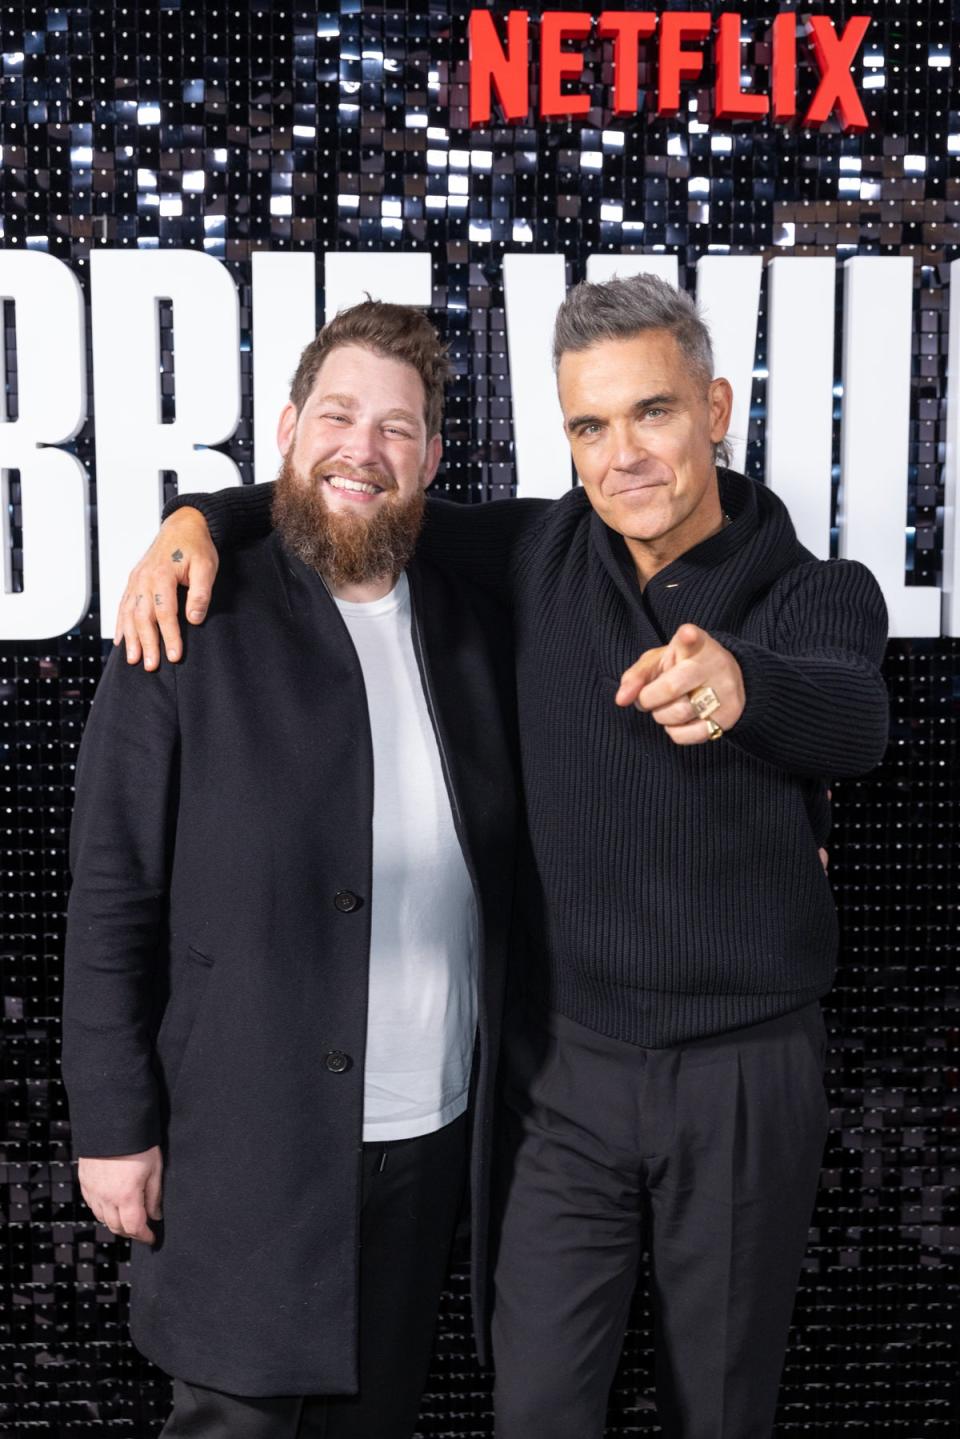 Joe Pearlman with Robbie Williams (Photo by StillMoving.Net for Netflix)